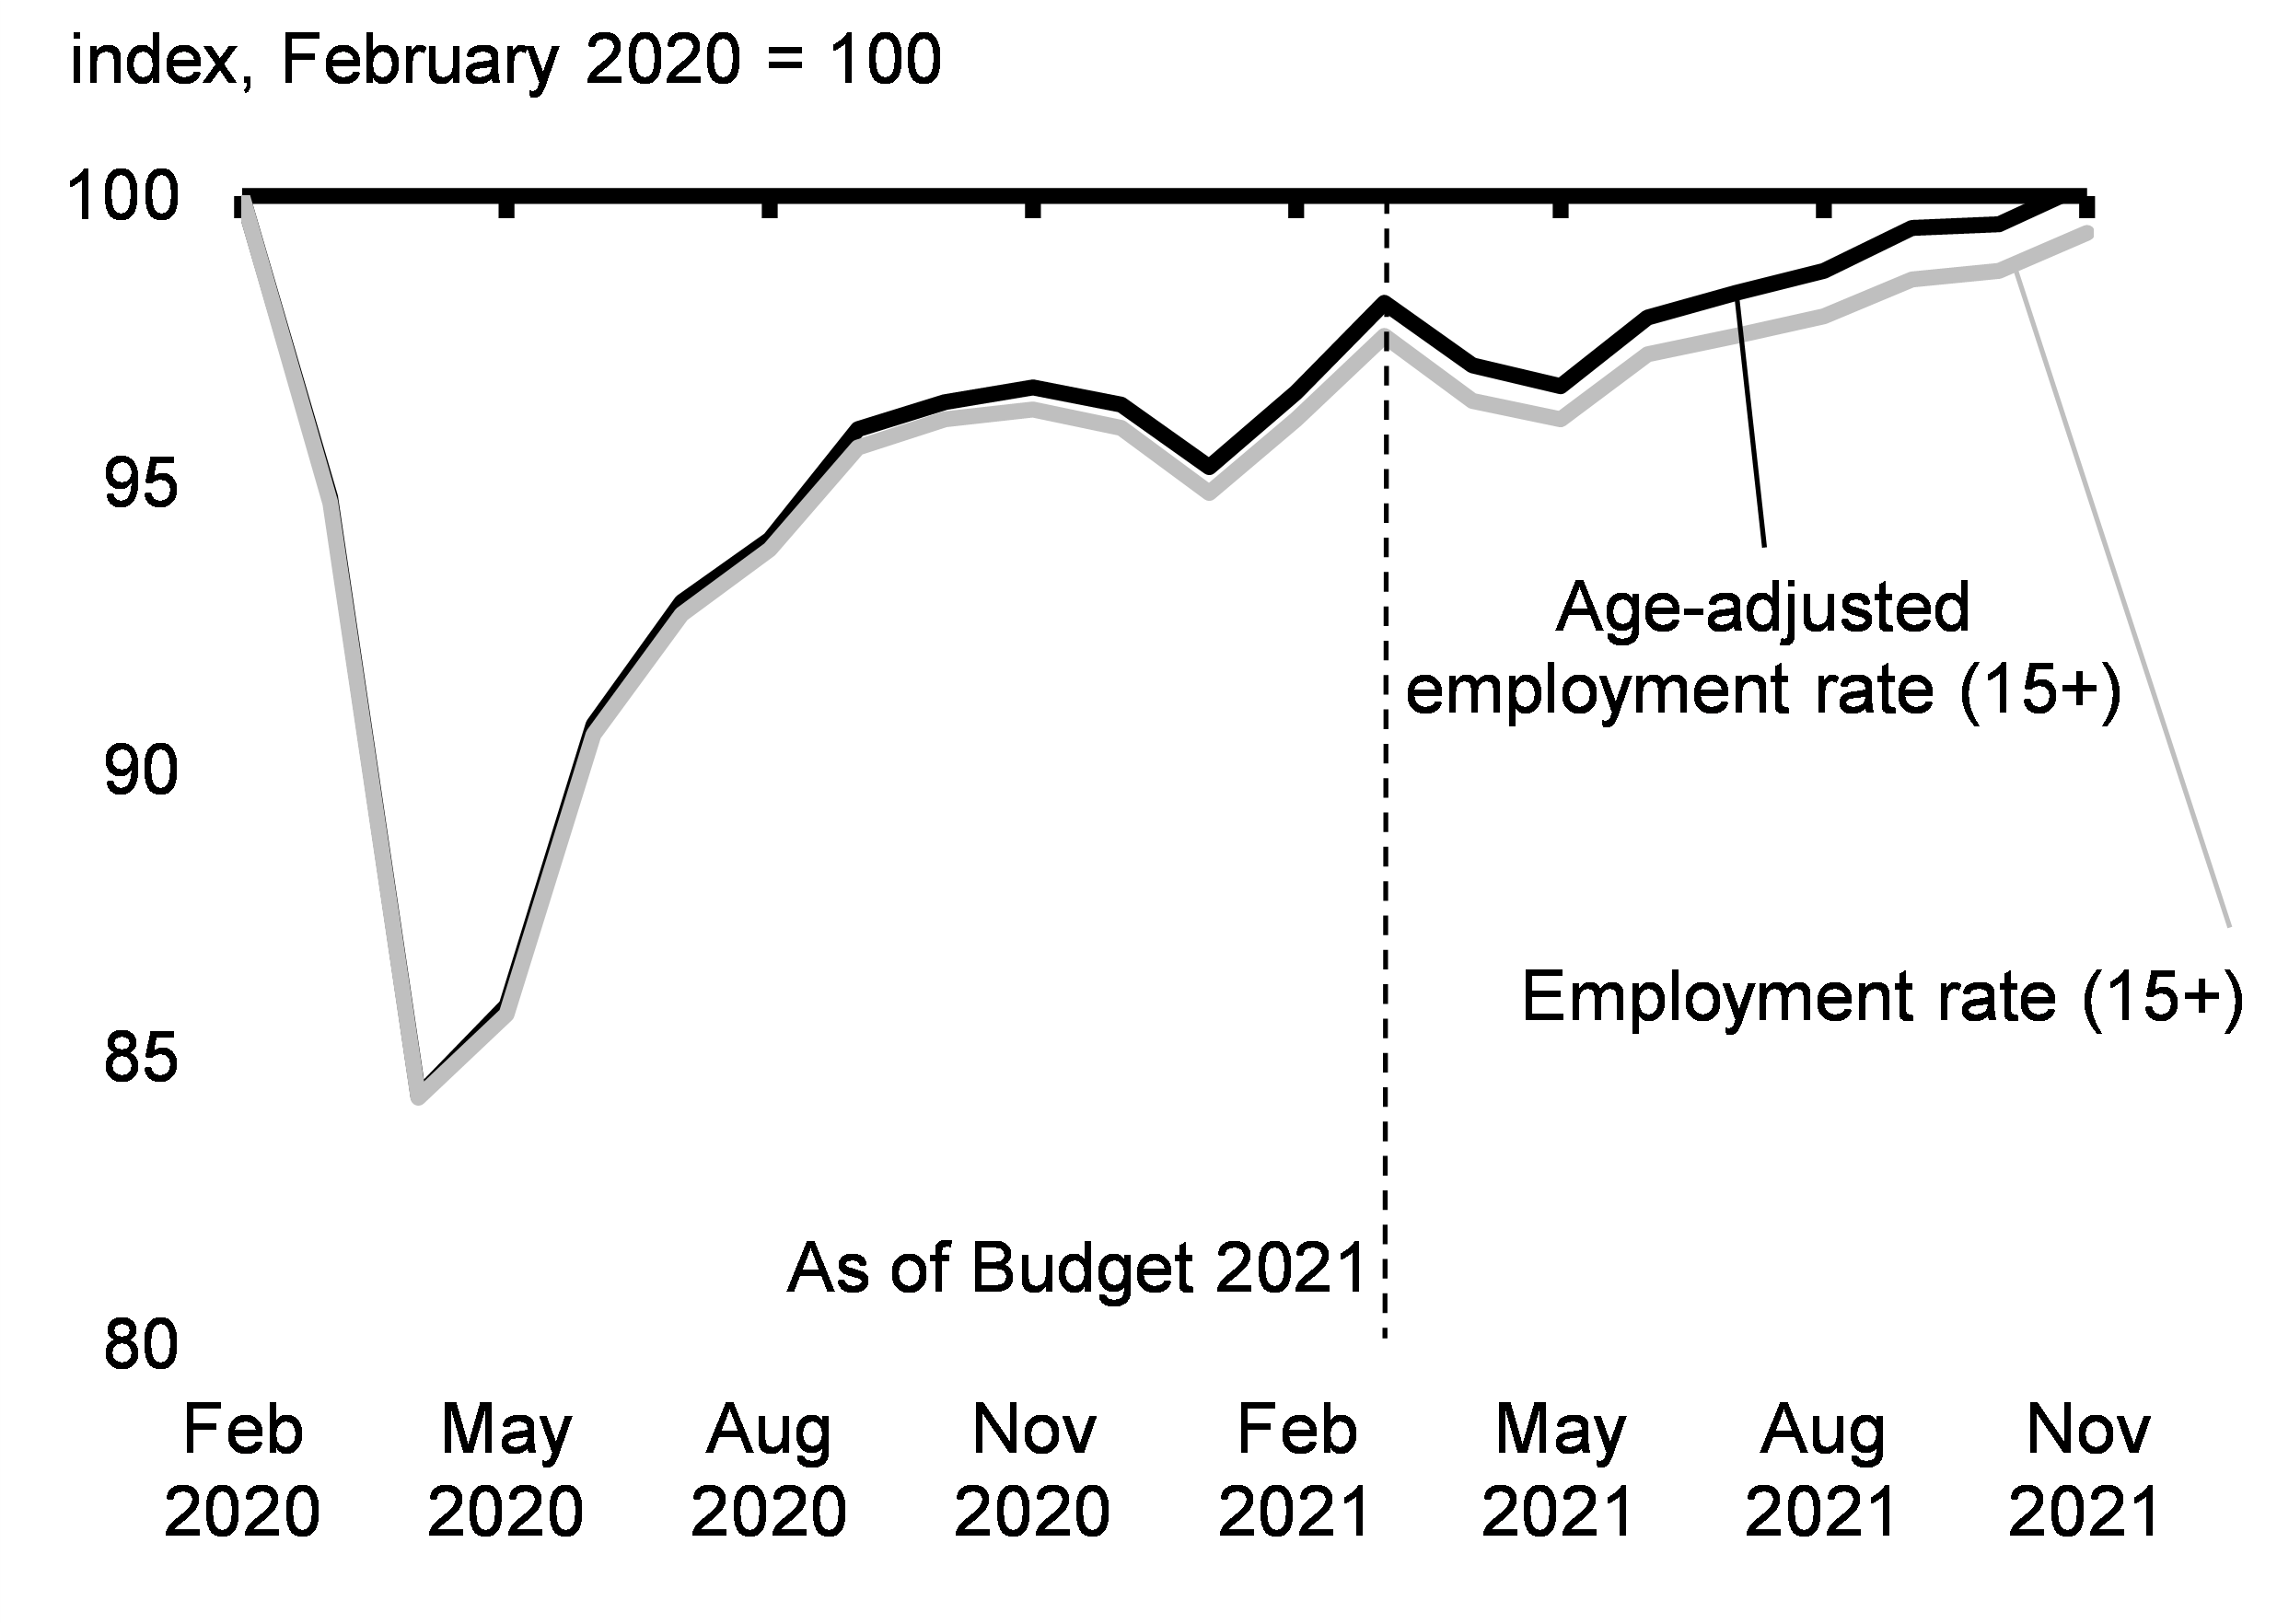 Chart 2.9: Employment Rate 